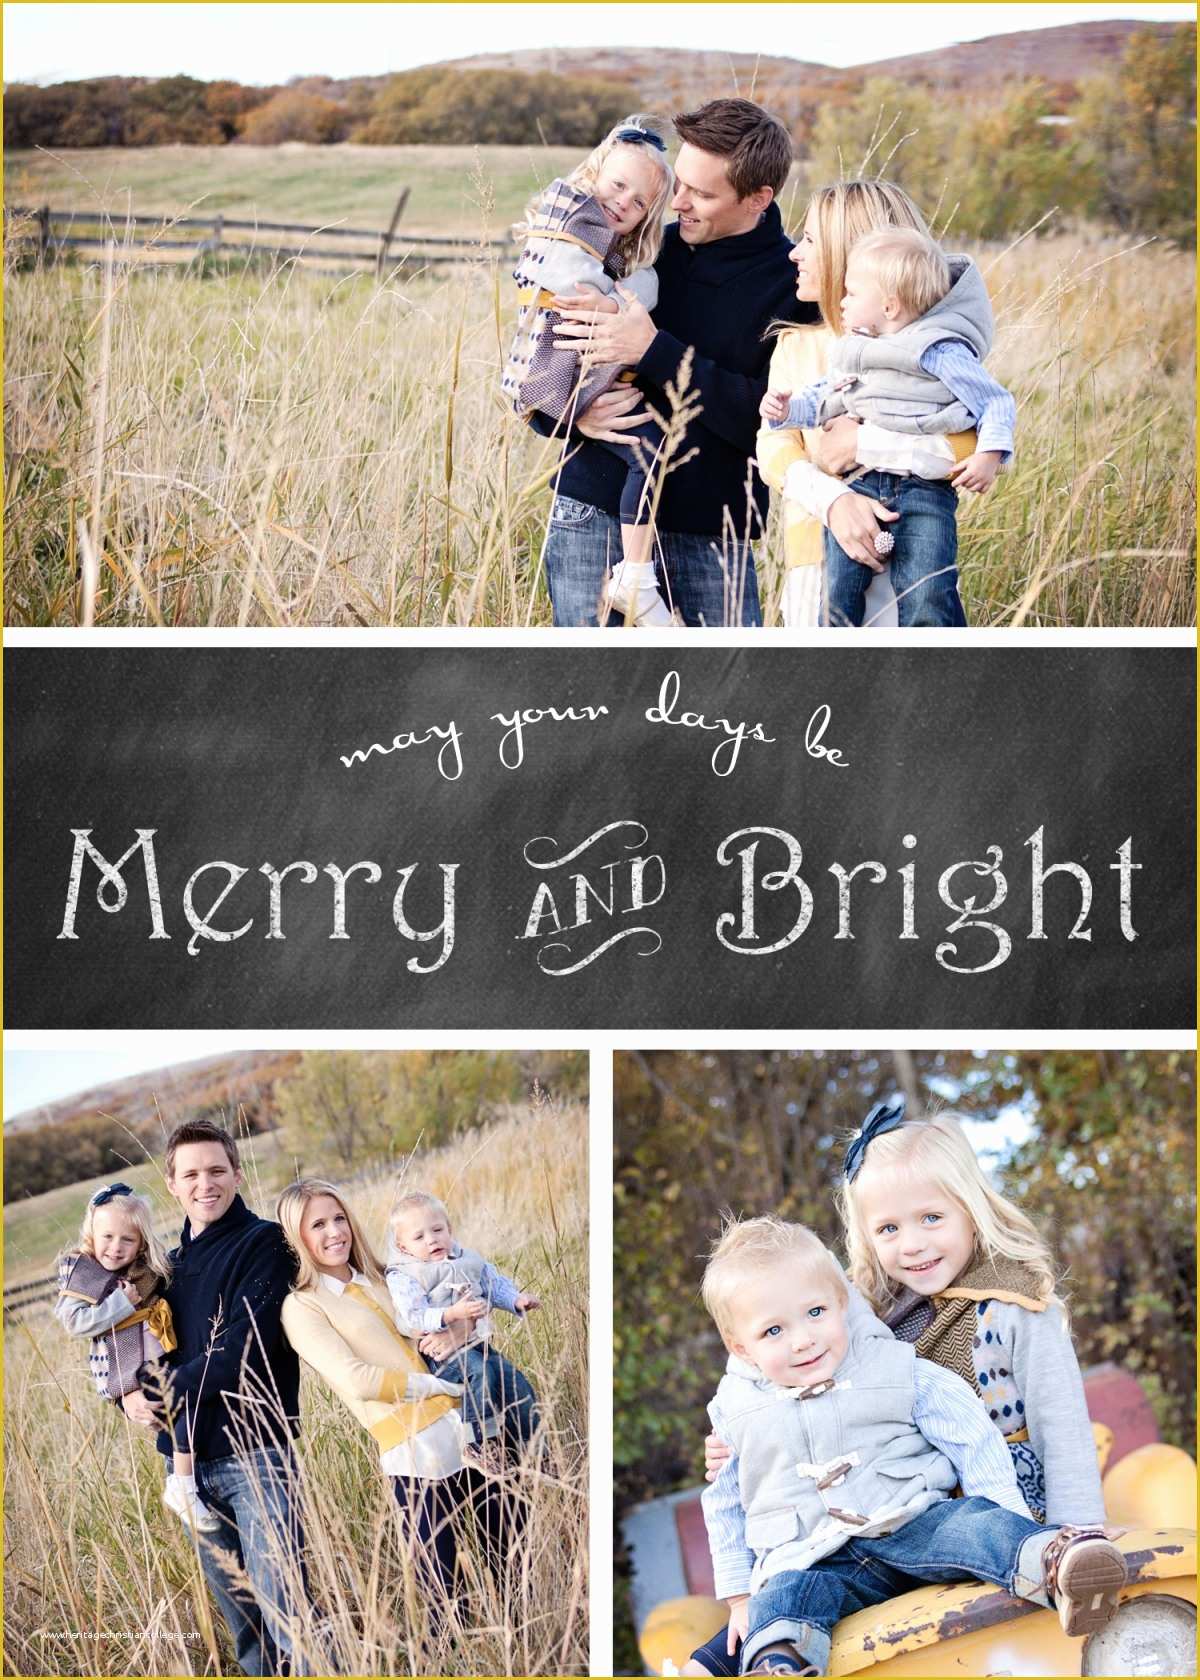 Free Photo Templates Of Free Chalkboard Christmas Card Templates Chelsea